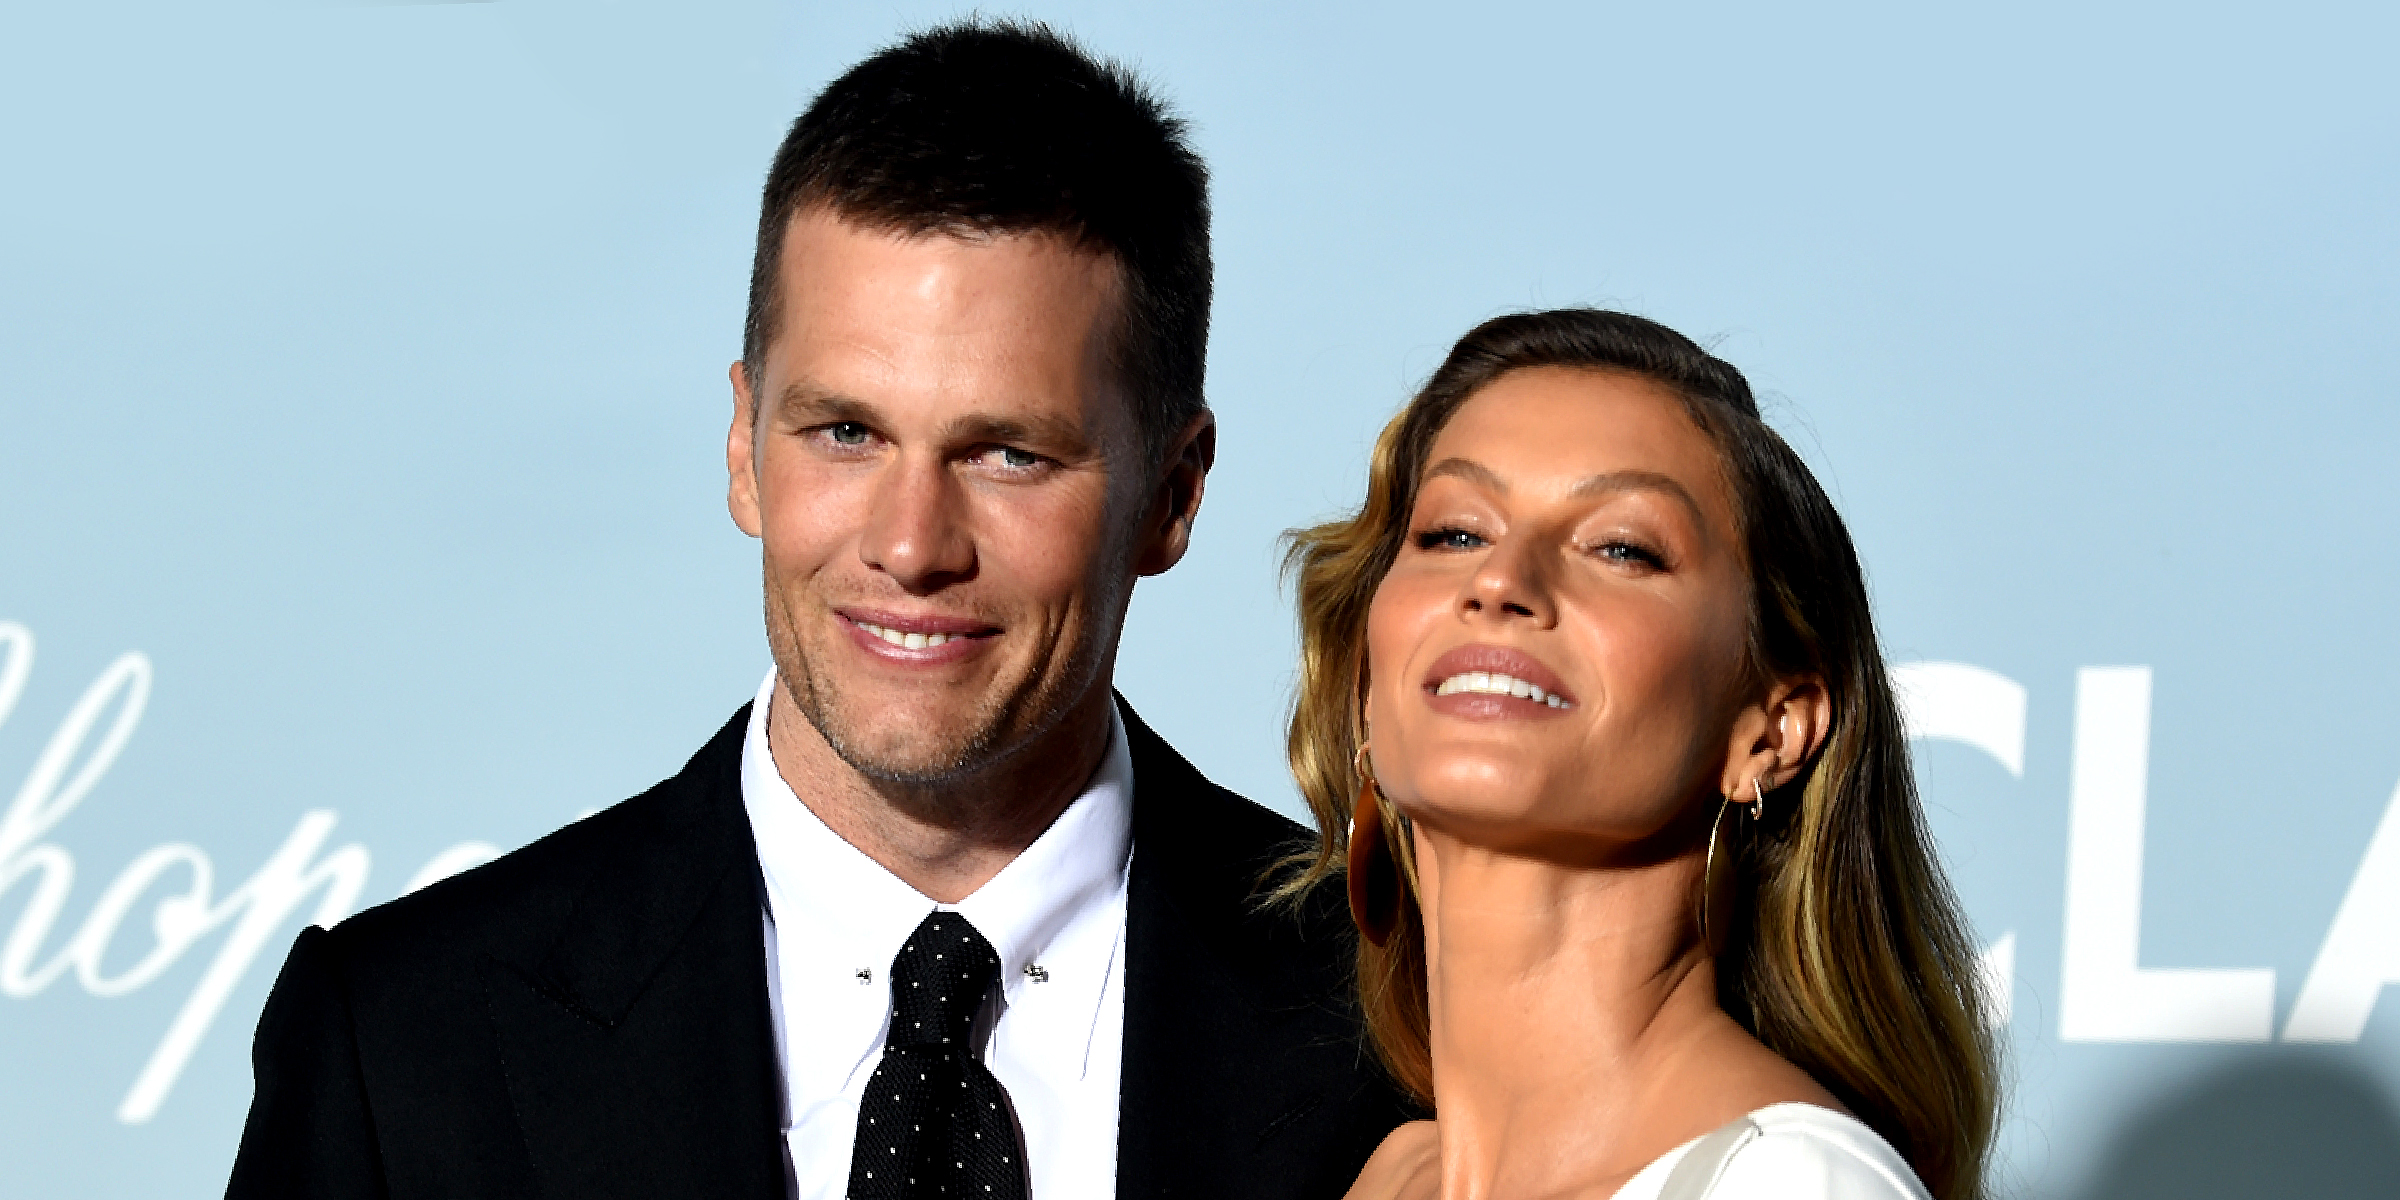 Tom Brady and Gisele Bündchen | Source: Getty Images